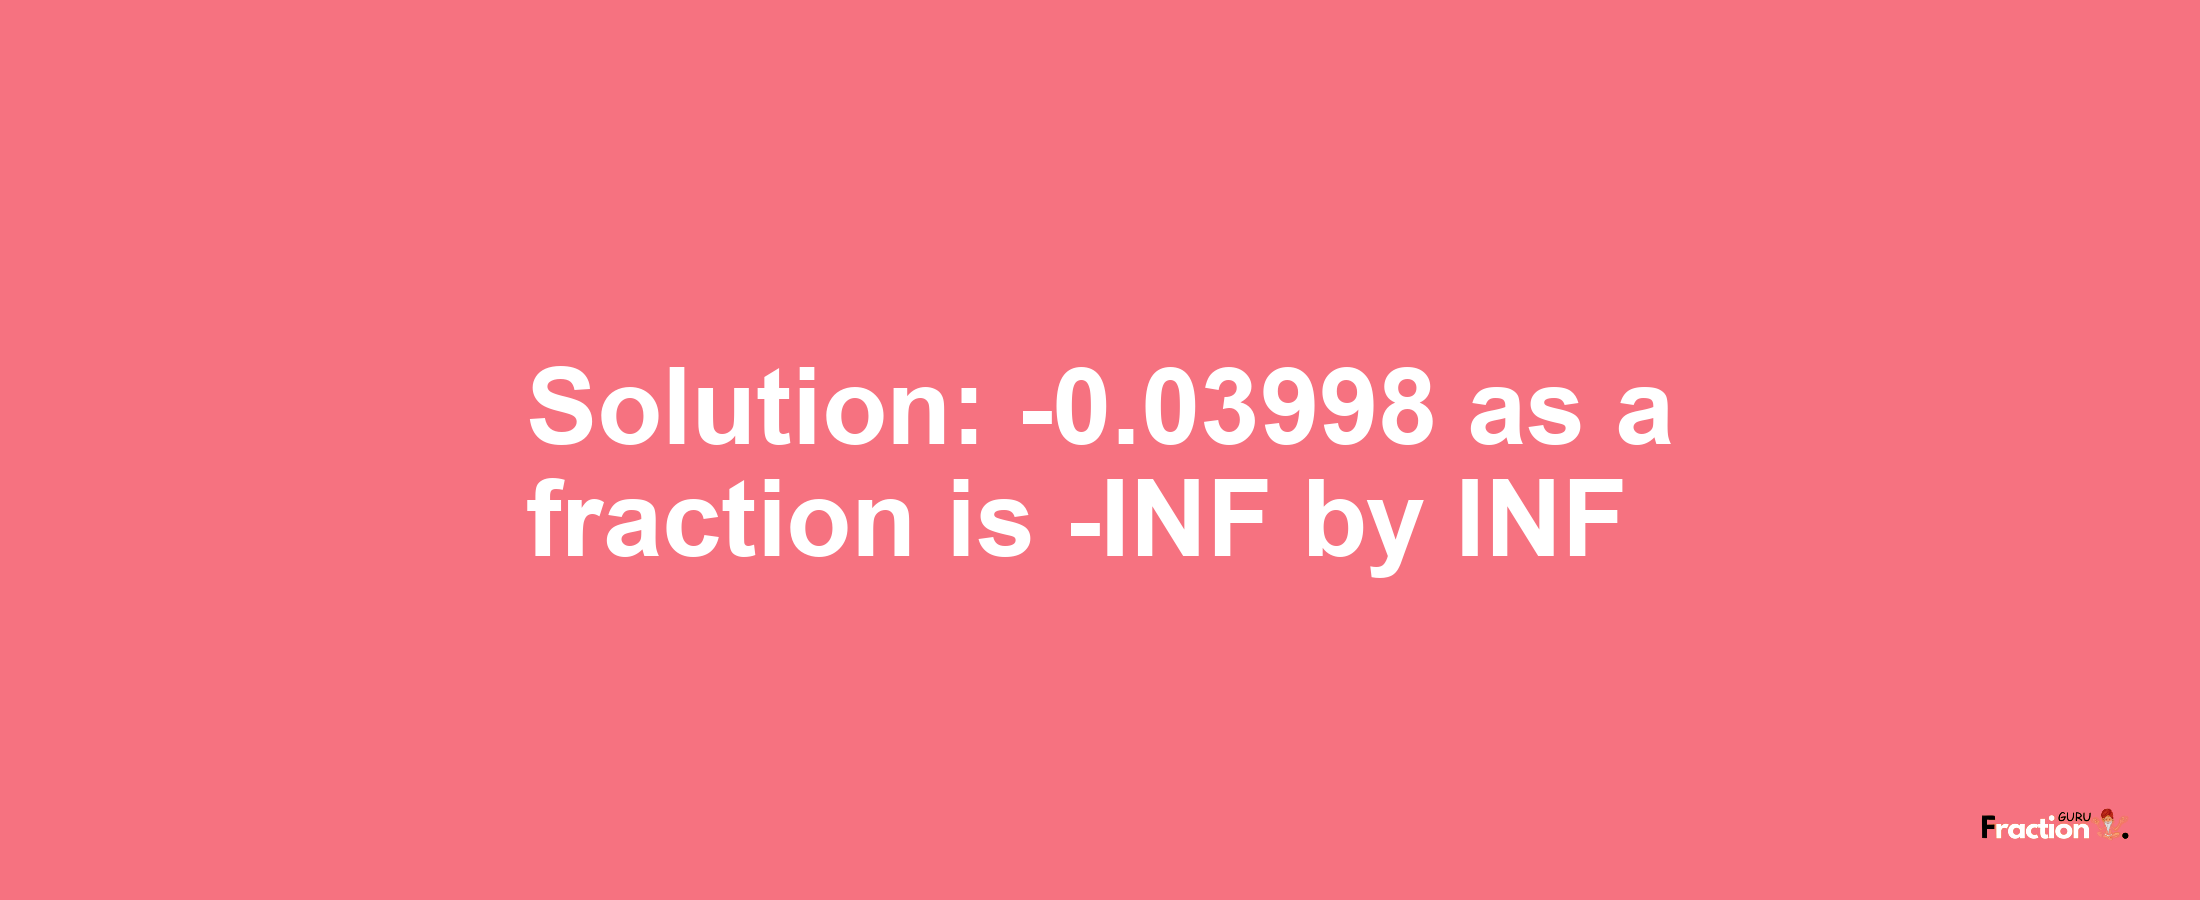 Solution:-0.03998 as a fraction is -INF/INF